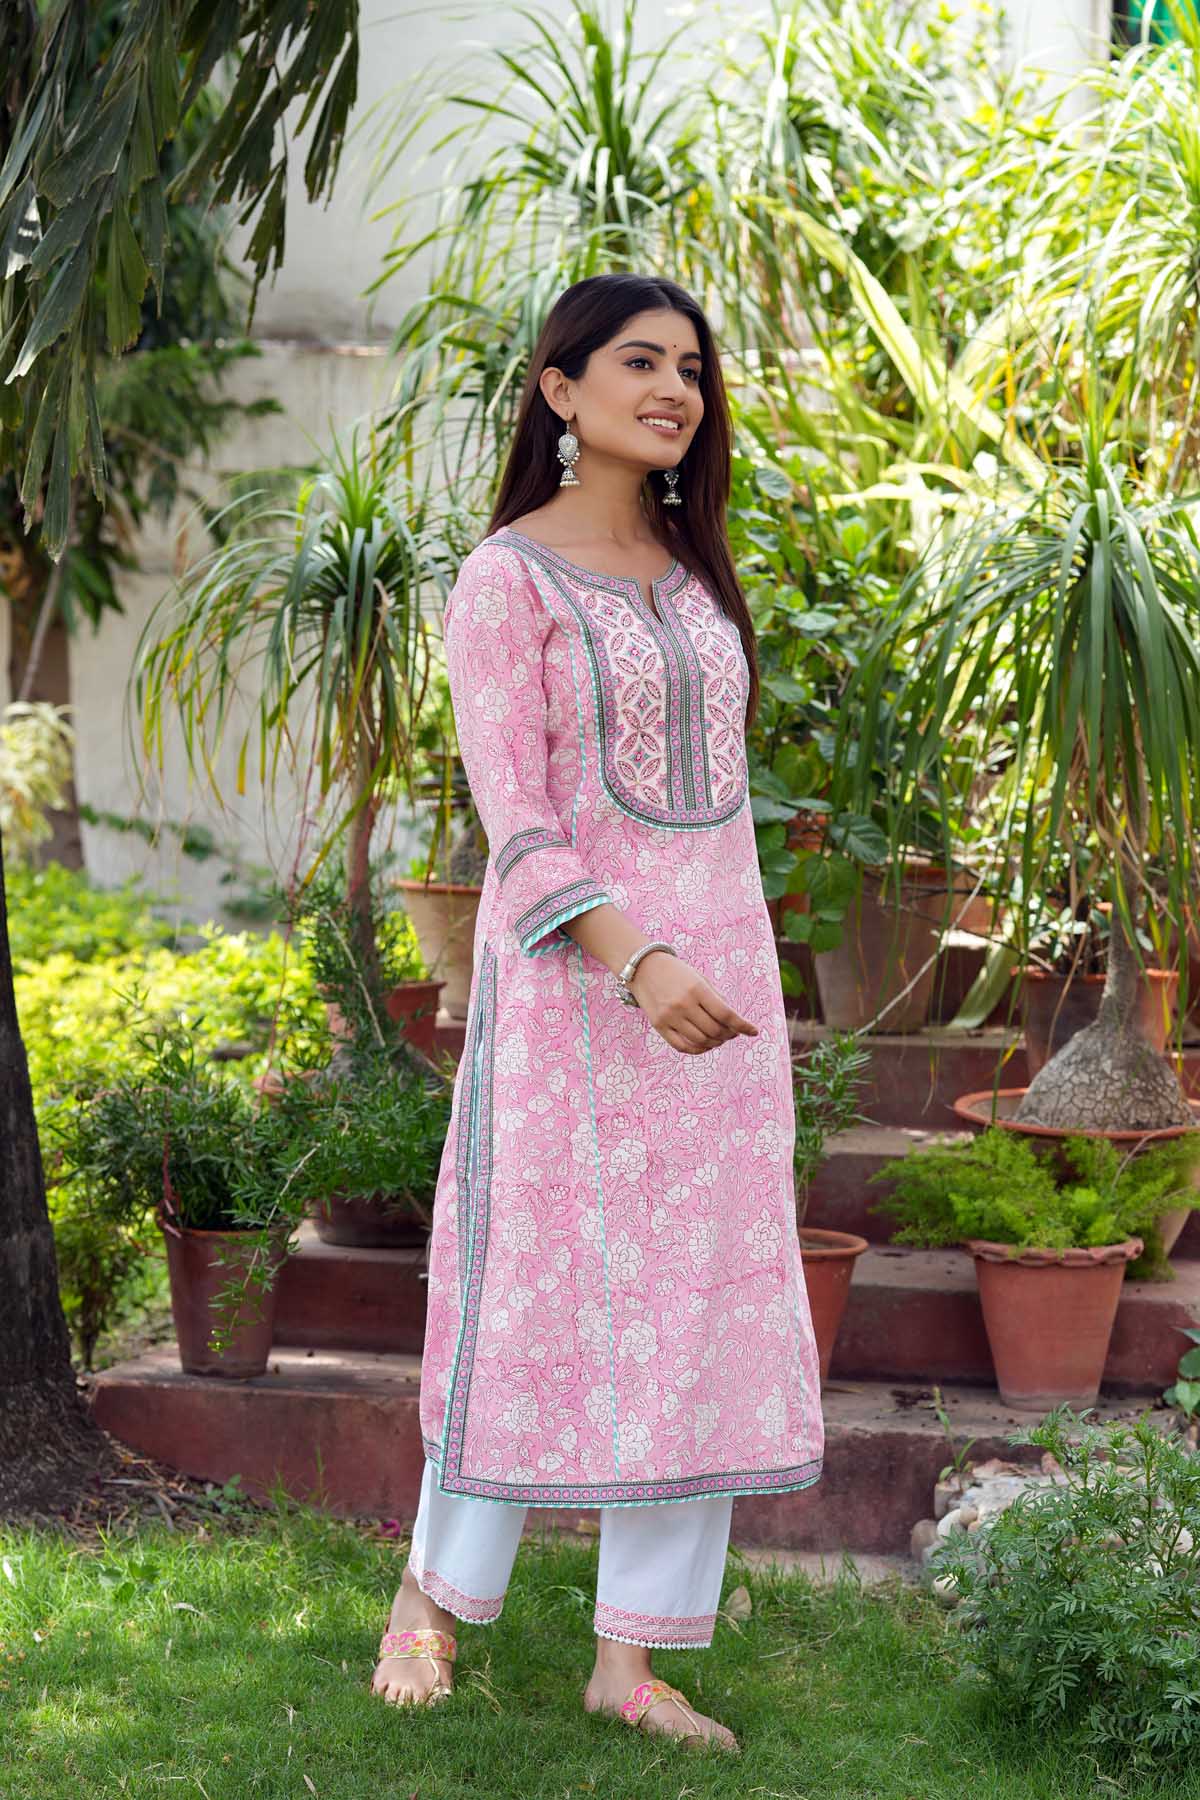 Buy Pink White Hand Block Printed Cotton Suit - Set of 3